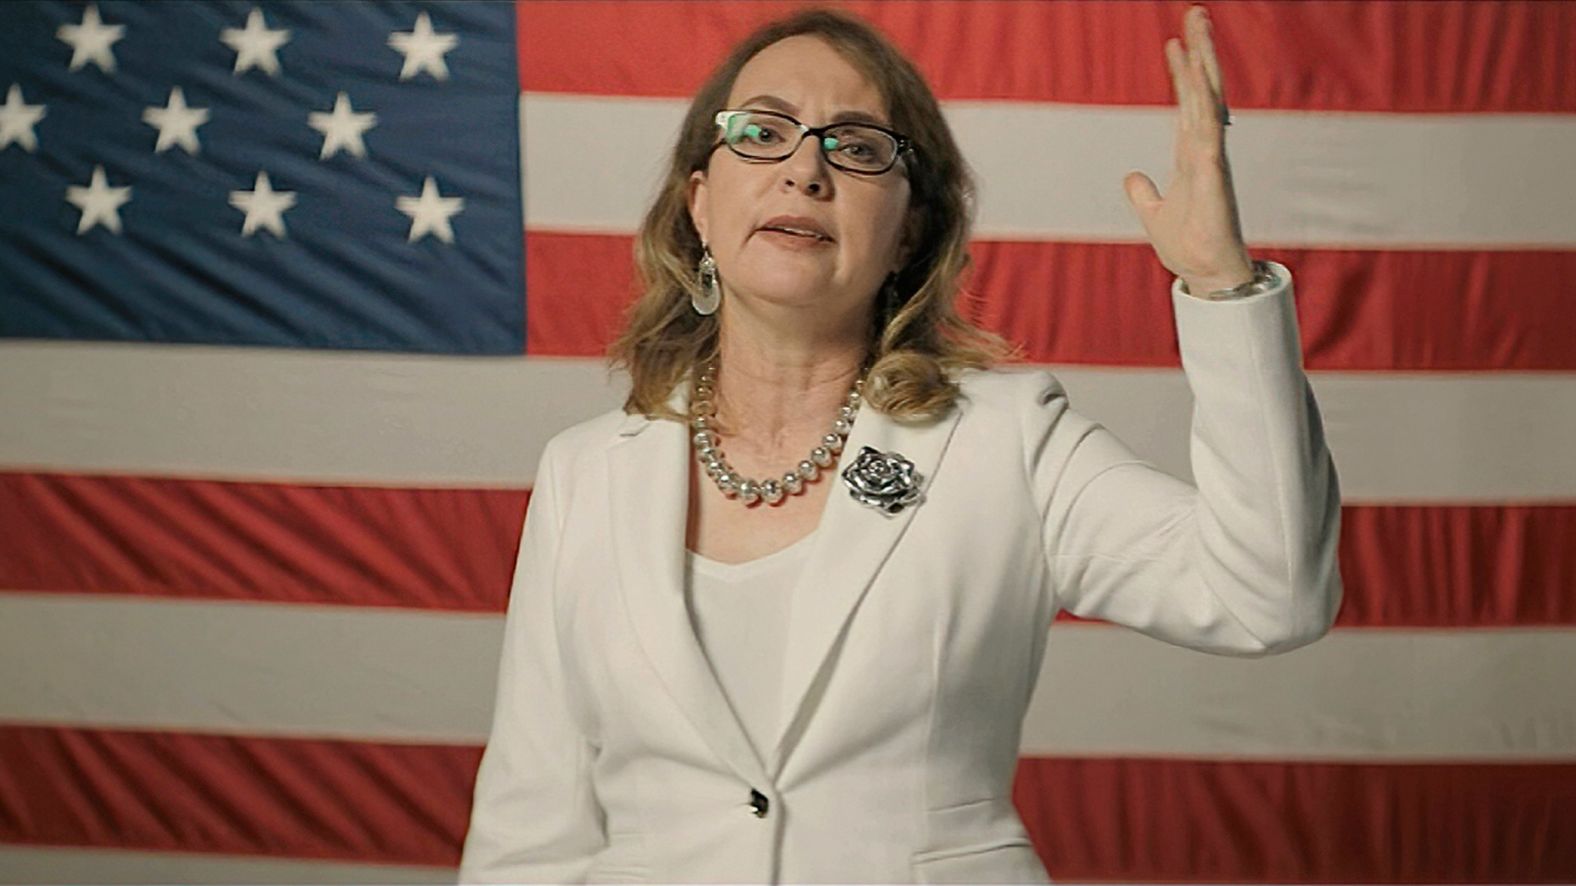 Former US Rep. Gabby Giffords, who was shot and wounded when a gunman opened fire on one of her events in 2011, touted the needs for resilience and strength during her speech on Wednesday. Giffords <a href="index.php?page=&url=https%3A%2F%2Fwww.cnn.com%2Fpolitics%2Flive-news%2Fdnc-2020-day-3%2Fh_dc530bc922f94d6f9de6f33c13b2e59f" target="_blank">has become a symbol</a> for the Democratic fight for stricter gun laws. "My recovery is a daily fight, but fighting makes me stronger," Giffords said. "Words once came easily. Today, I struggle to speak. But I have not lost my voice."